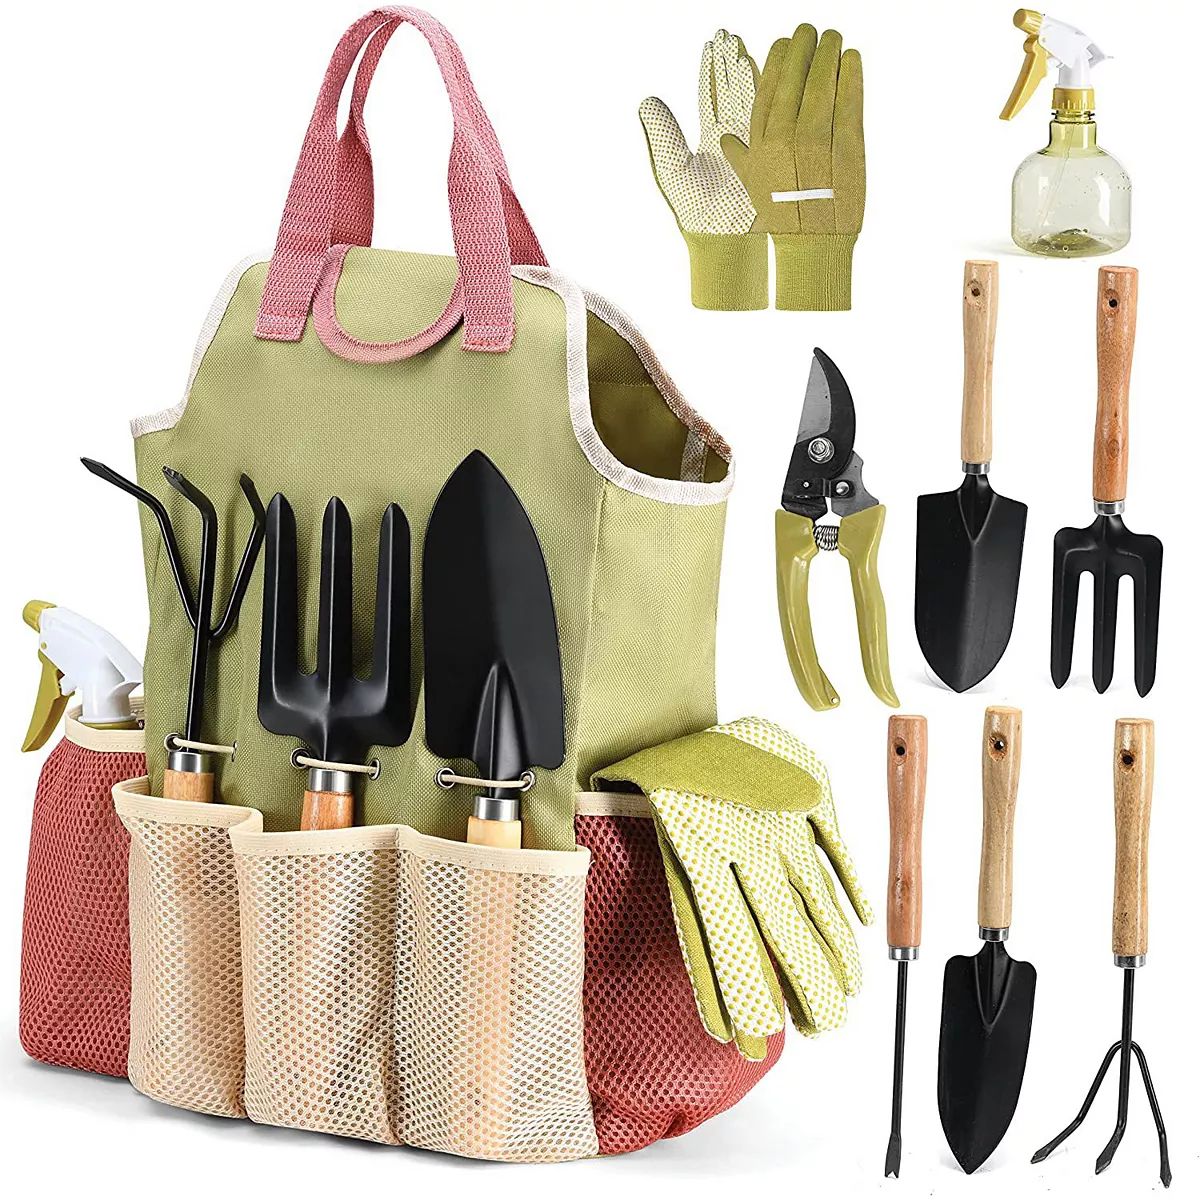 Complete Garden Tool Kit Comes With Bag & Gloves,Garden Tool Set with Spray-Bottle | Kohl's